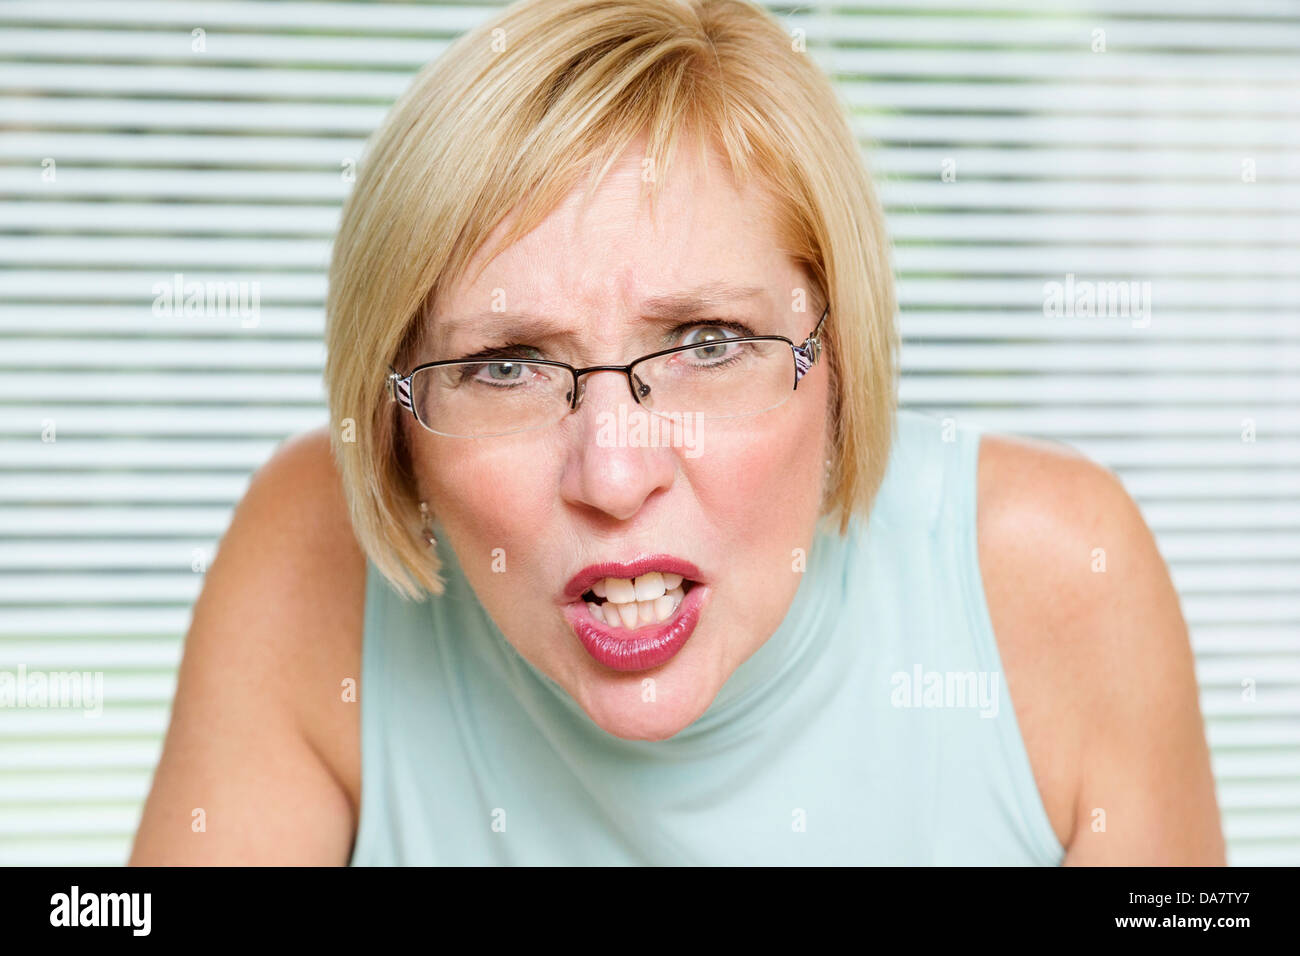 angry middle aged woman Stock Photo